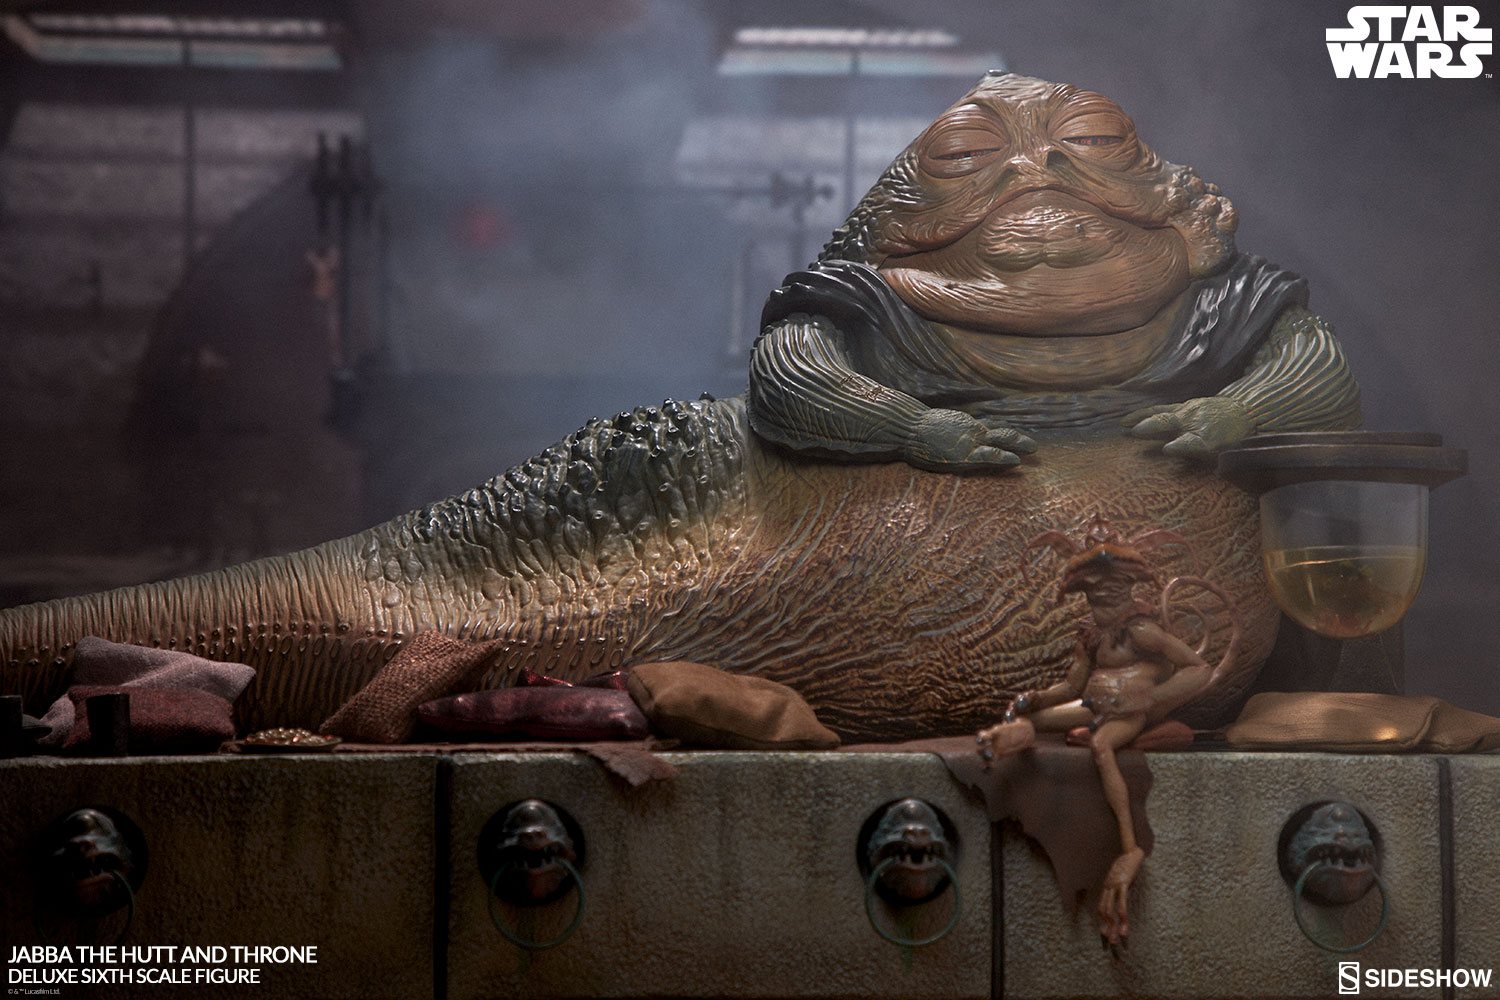 star-wars-jabba-the-hutt-and-throne-deluxe-sixth-scale-figure-sideshow-100410-01.jpg